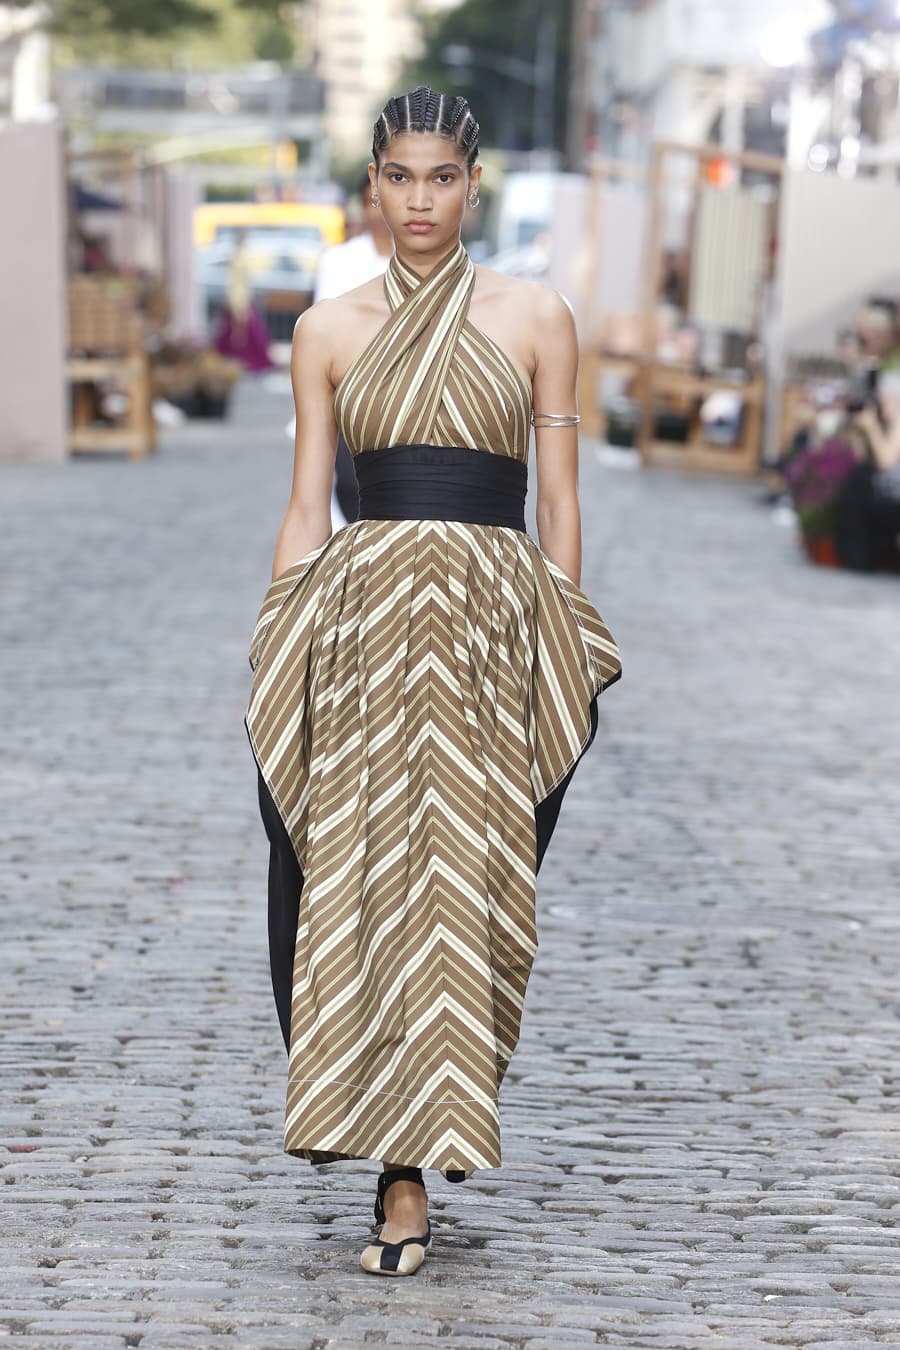 Tory Burch 2022 Spring Summer Womens Runway Looks, Fashion Forward  Forecast, Curated Fashion Week Runway Shows & Season Collections, Trendsetting Styles by Designer Brands